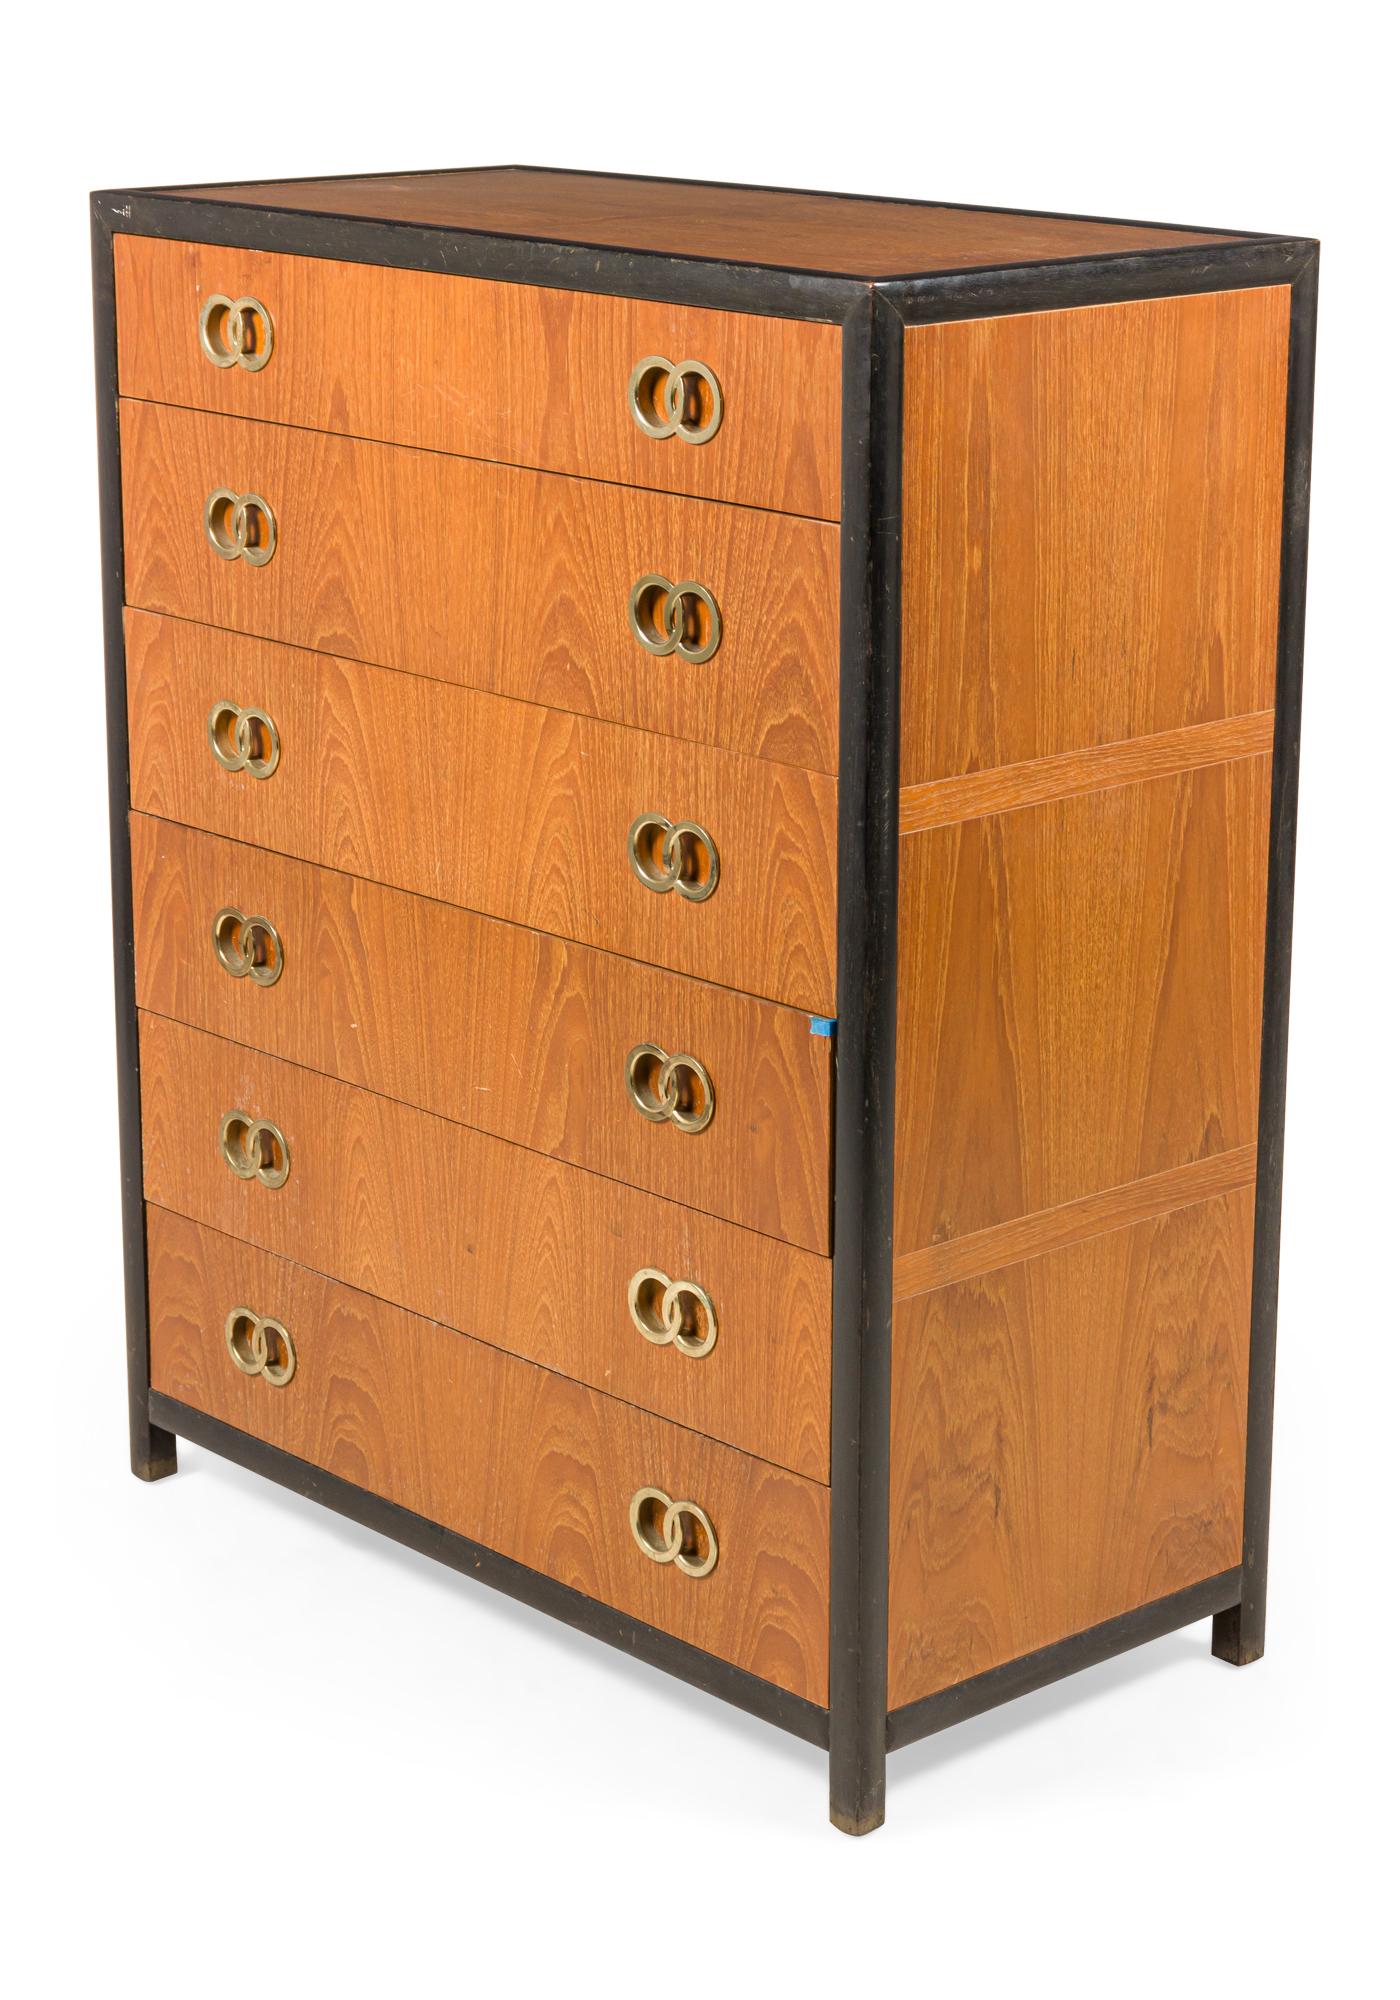 American Mid-Century 6-drawer high chest with a dark stained frame and walnut drawer fronts and body with brass interlocking ring inset drawer pulls. (MICHAEL TAYLOR FOR BAKER FURNITURE CO).
 